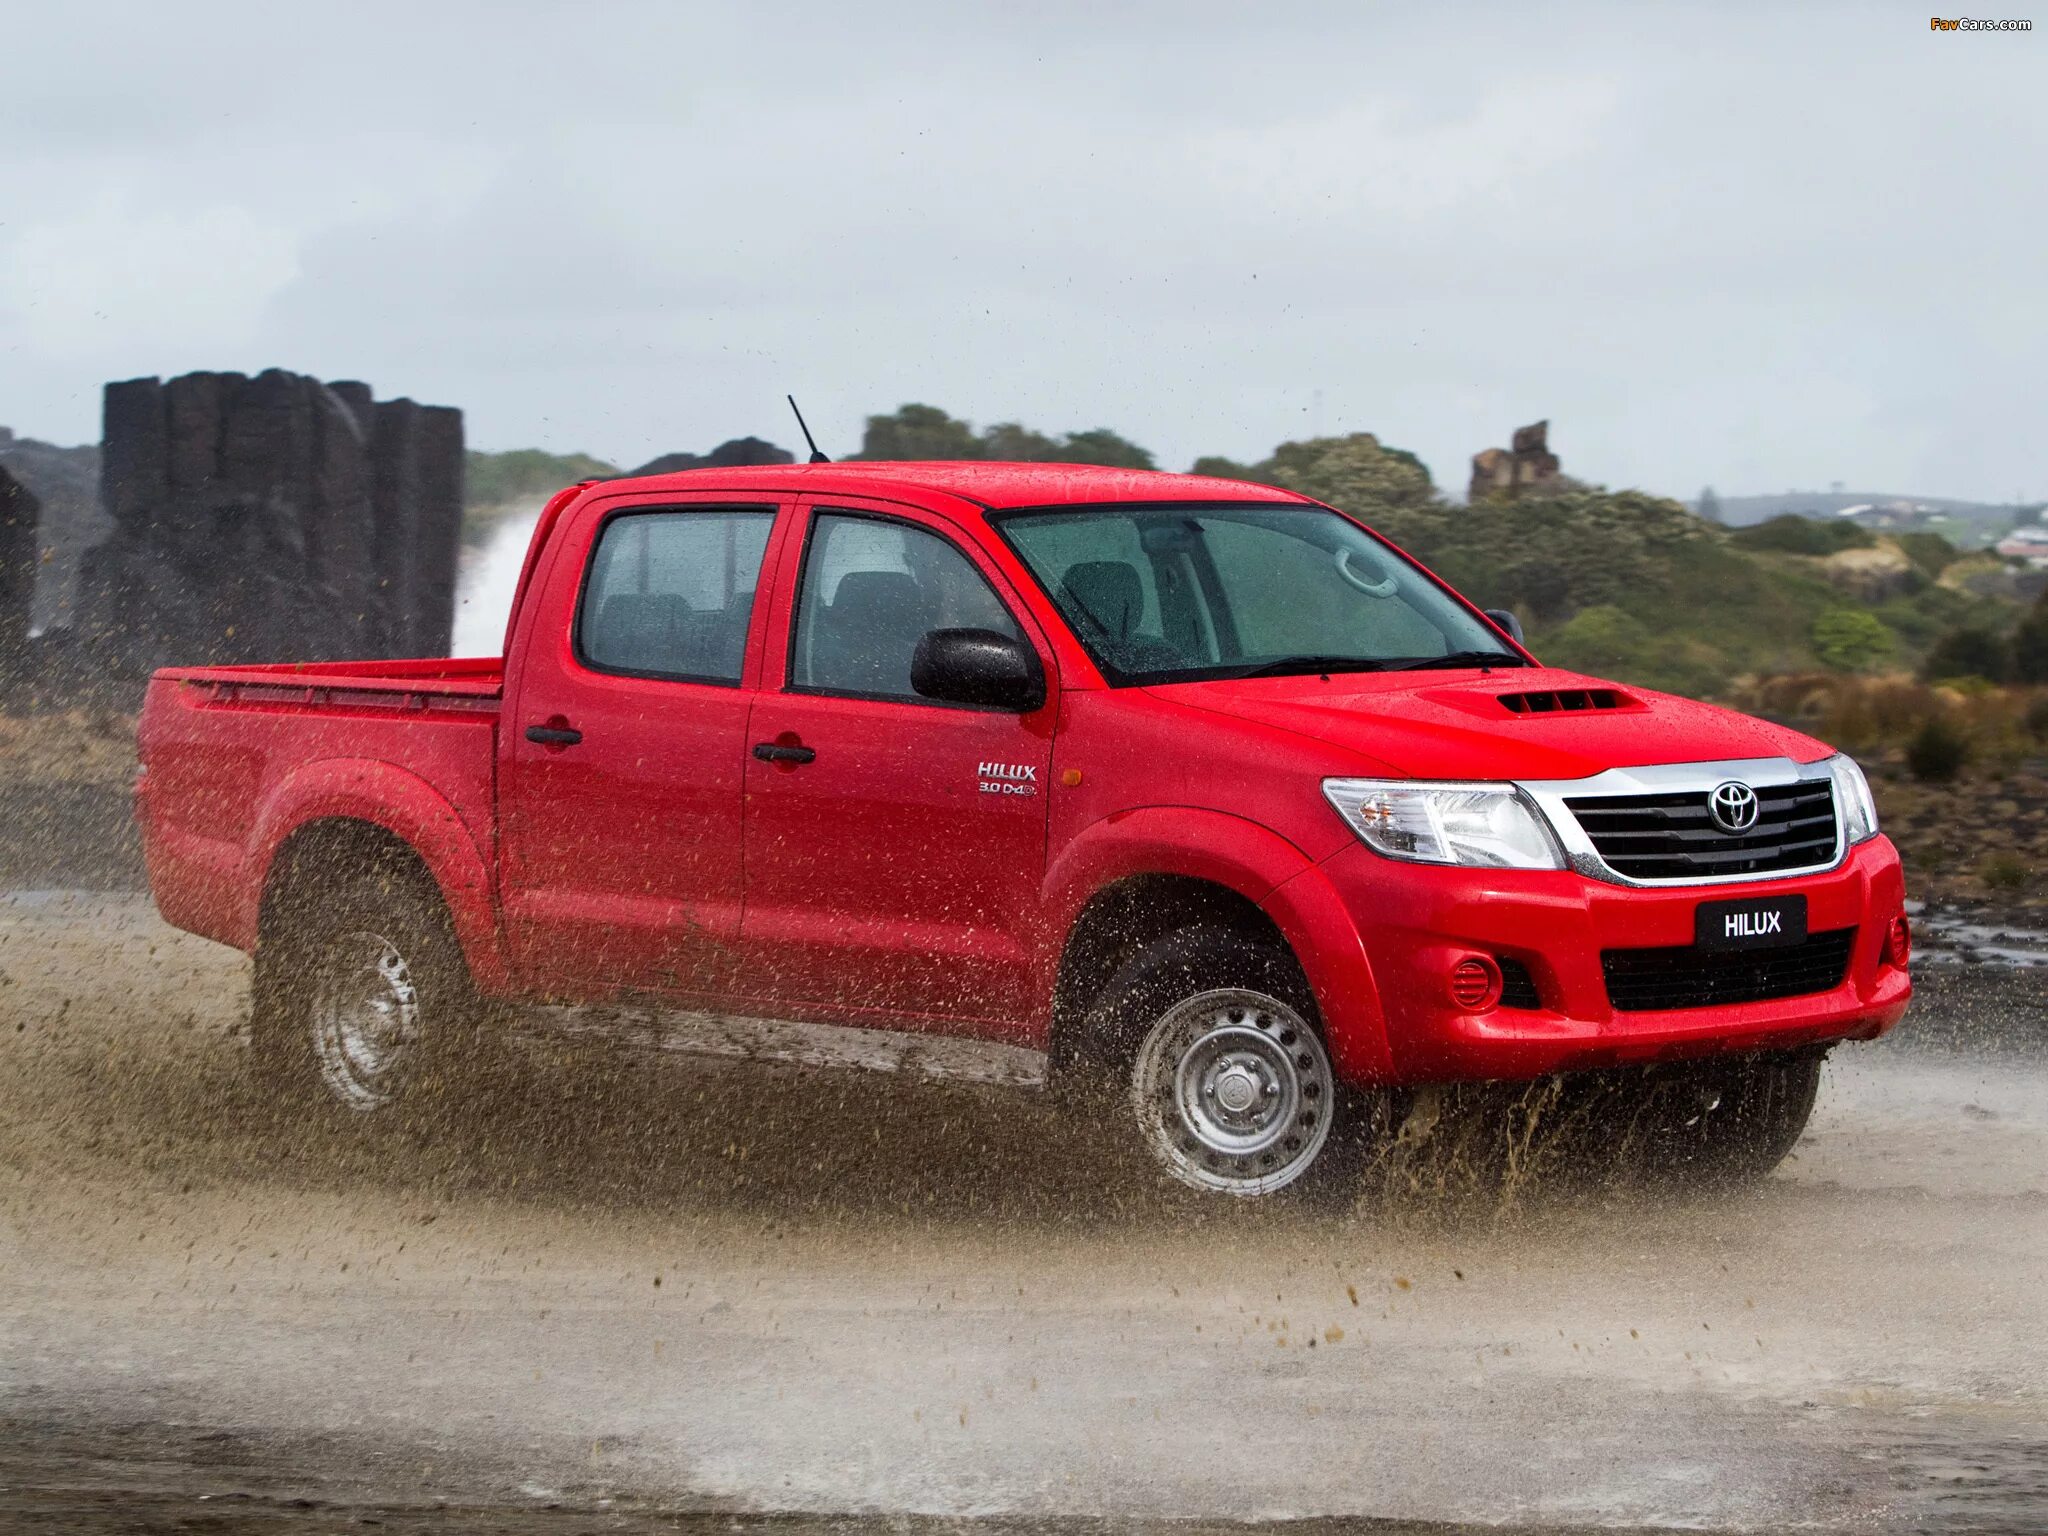 Toyota Hilux 4x4 Double Cab. Red Toyota Hilux. Toyota Hilux 4x4 2014. Hilux Double Cab. Би пикап